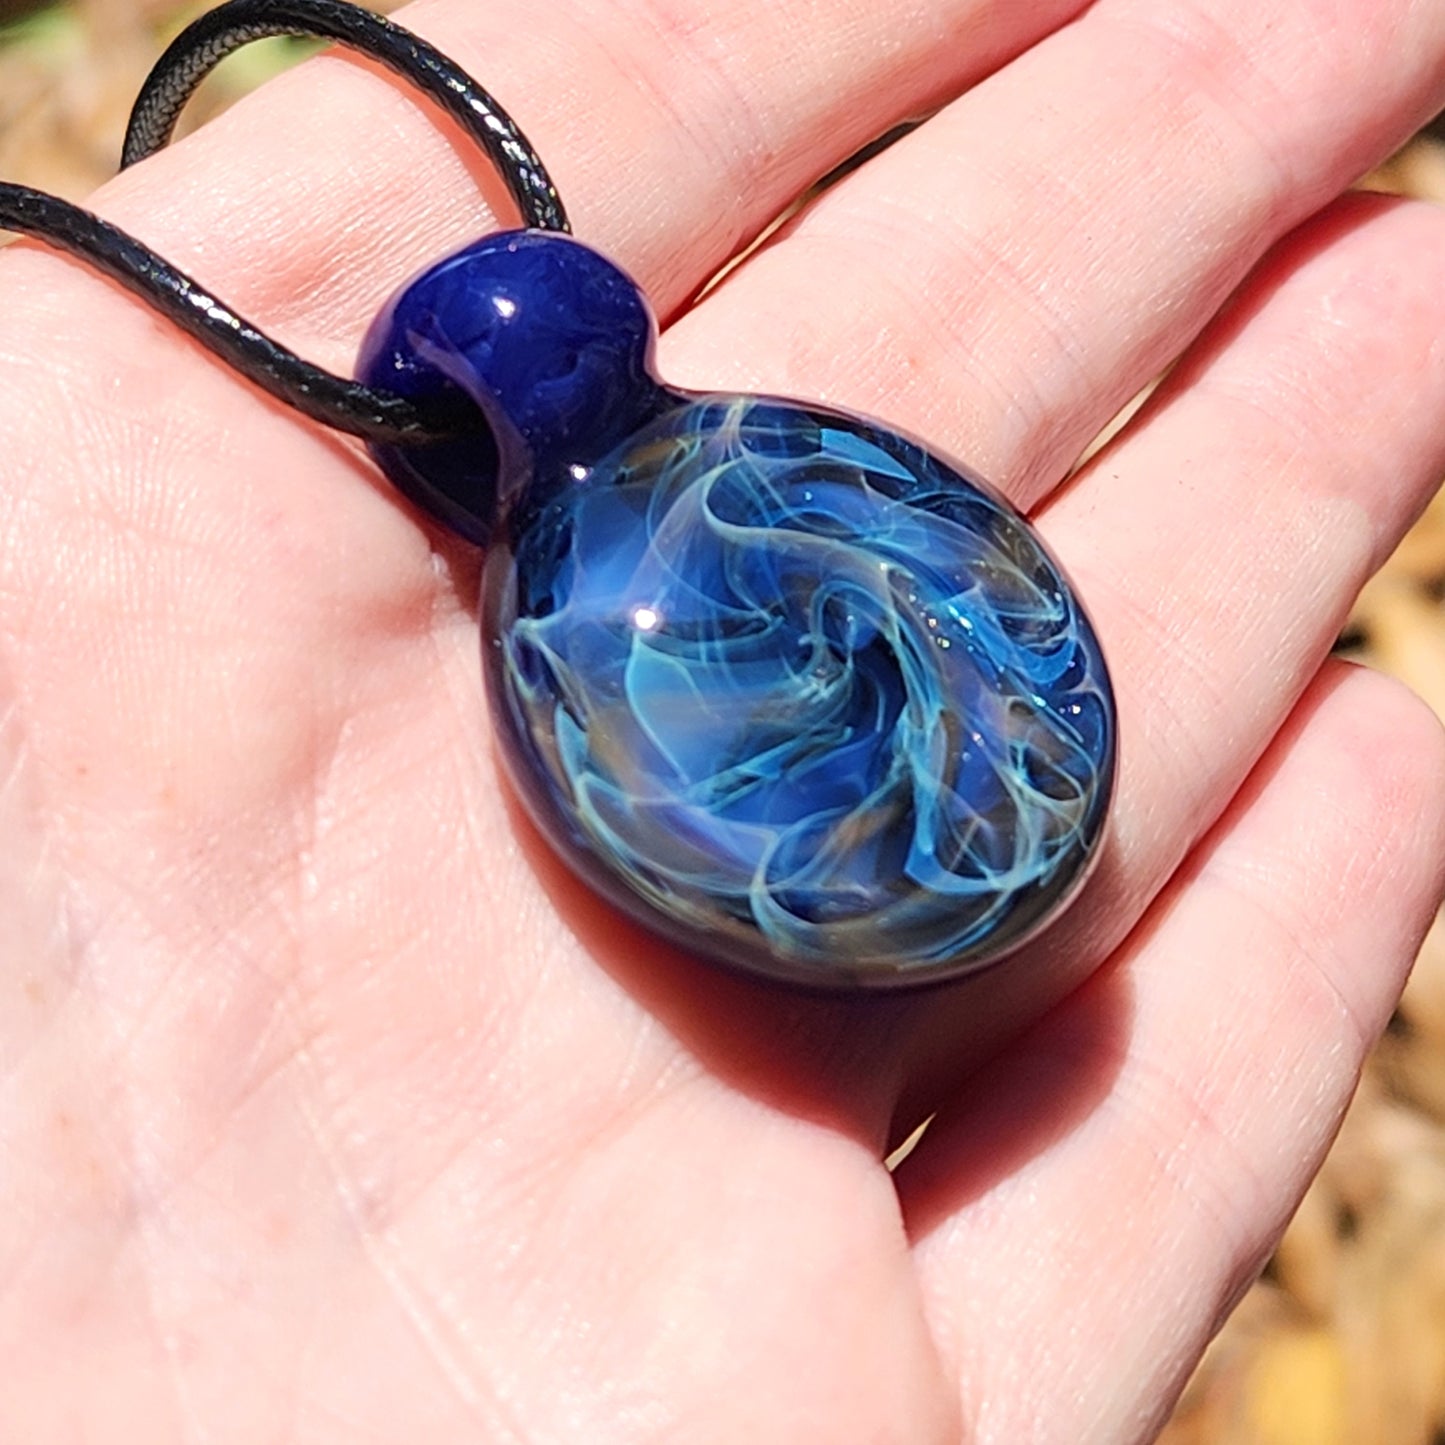 Cosmic Elegance: Handcrafted Glass Pendant with Silver, Gold, and Purple Accents